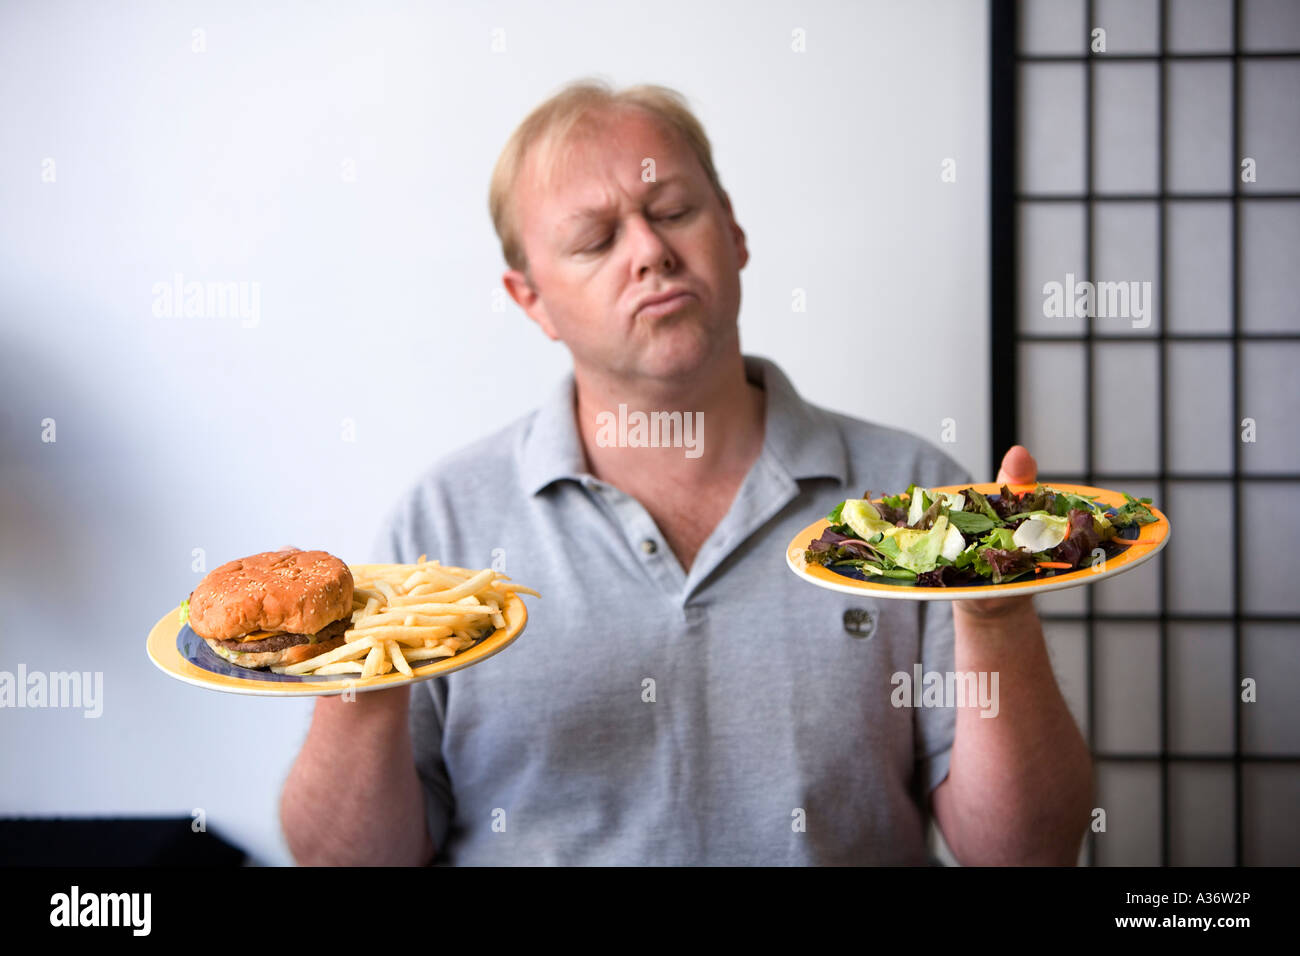 Man chooses between salad and burger with chips Stock Photo